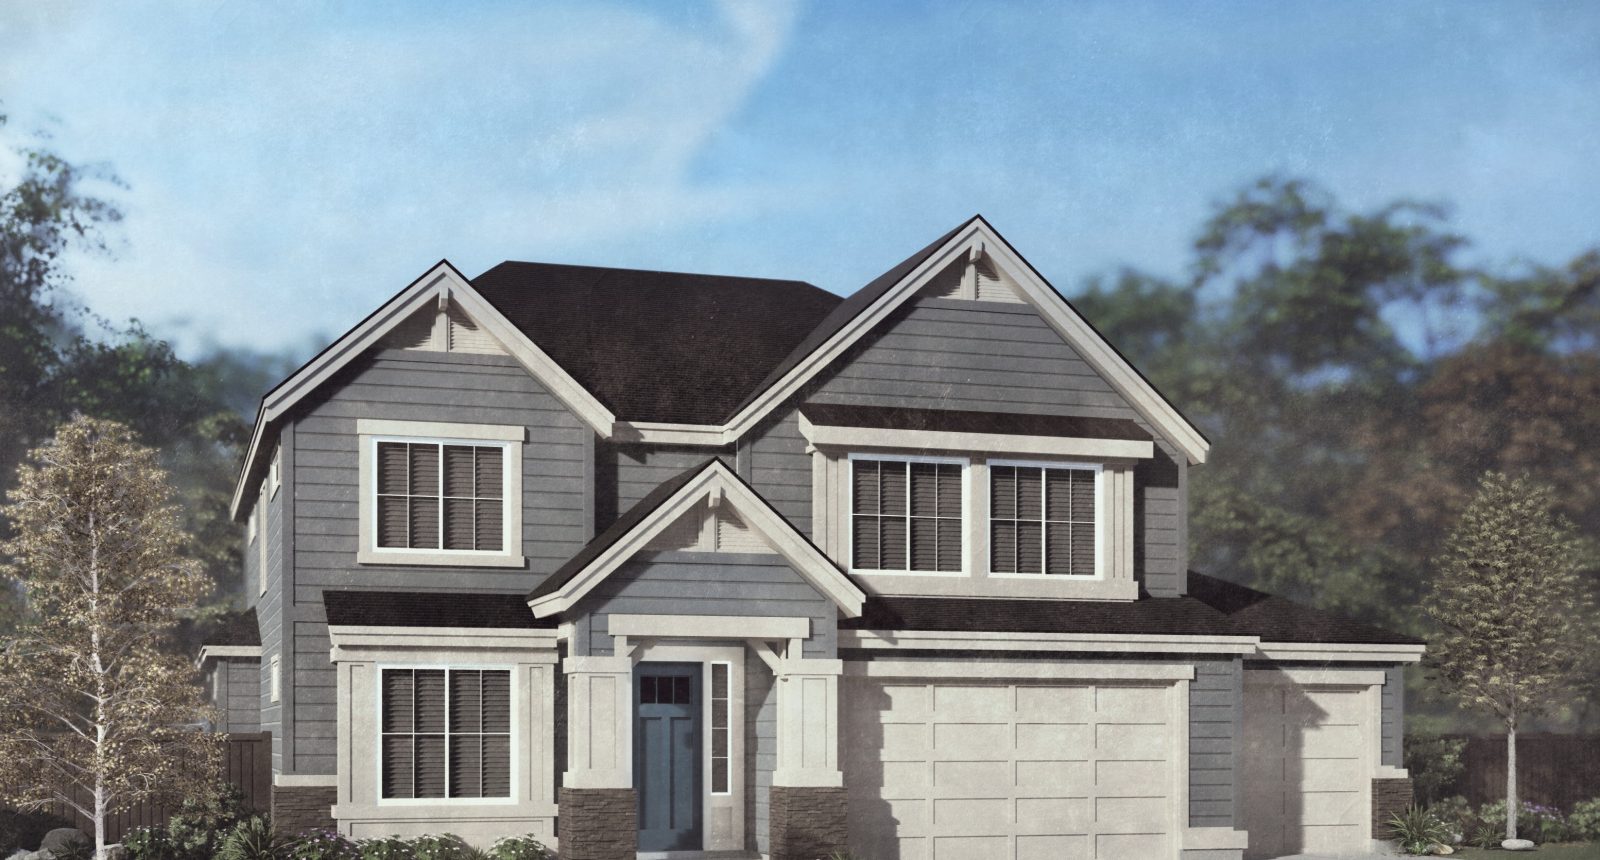 2 Story House Plans in Meridian ID - Ballybunion